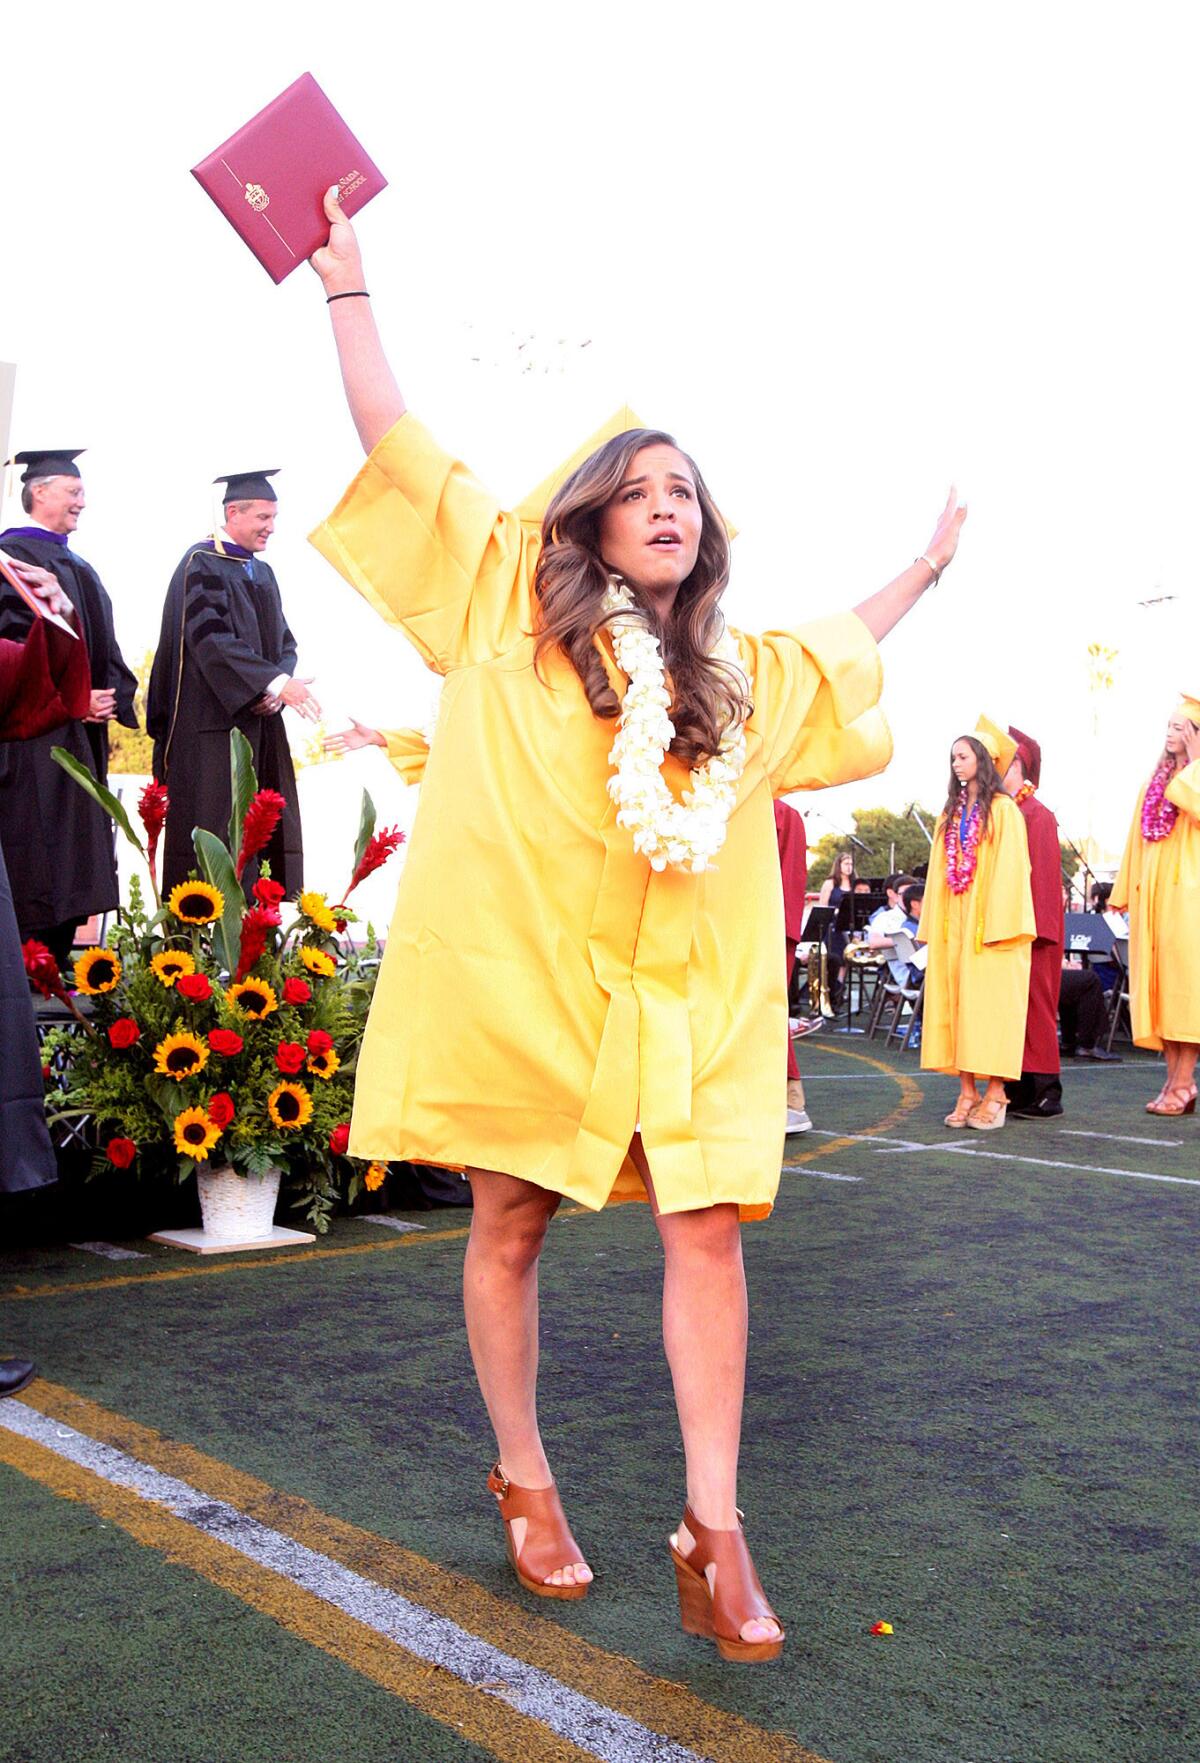 Graduate Taylor Afshar proudly lifts her diploma over her head after graduating at the graduation of La Canada High School on the football field in La Canada Flintridge on Thursday, June 5, 2014.